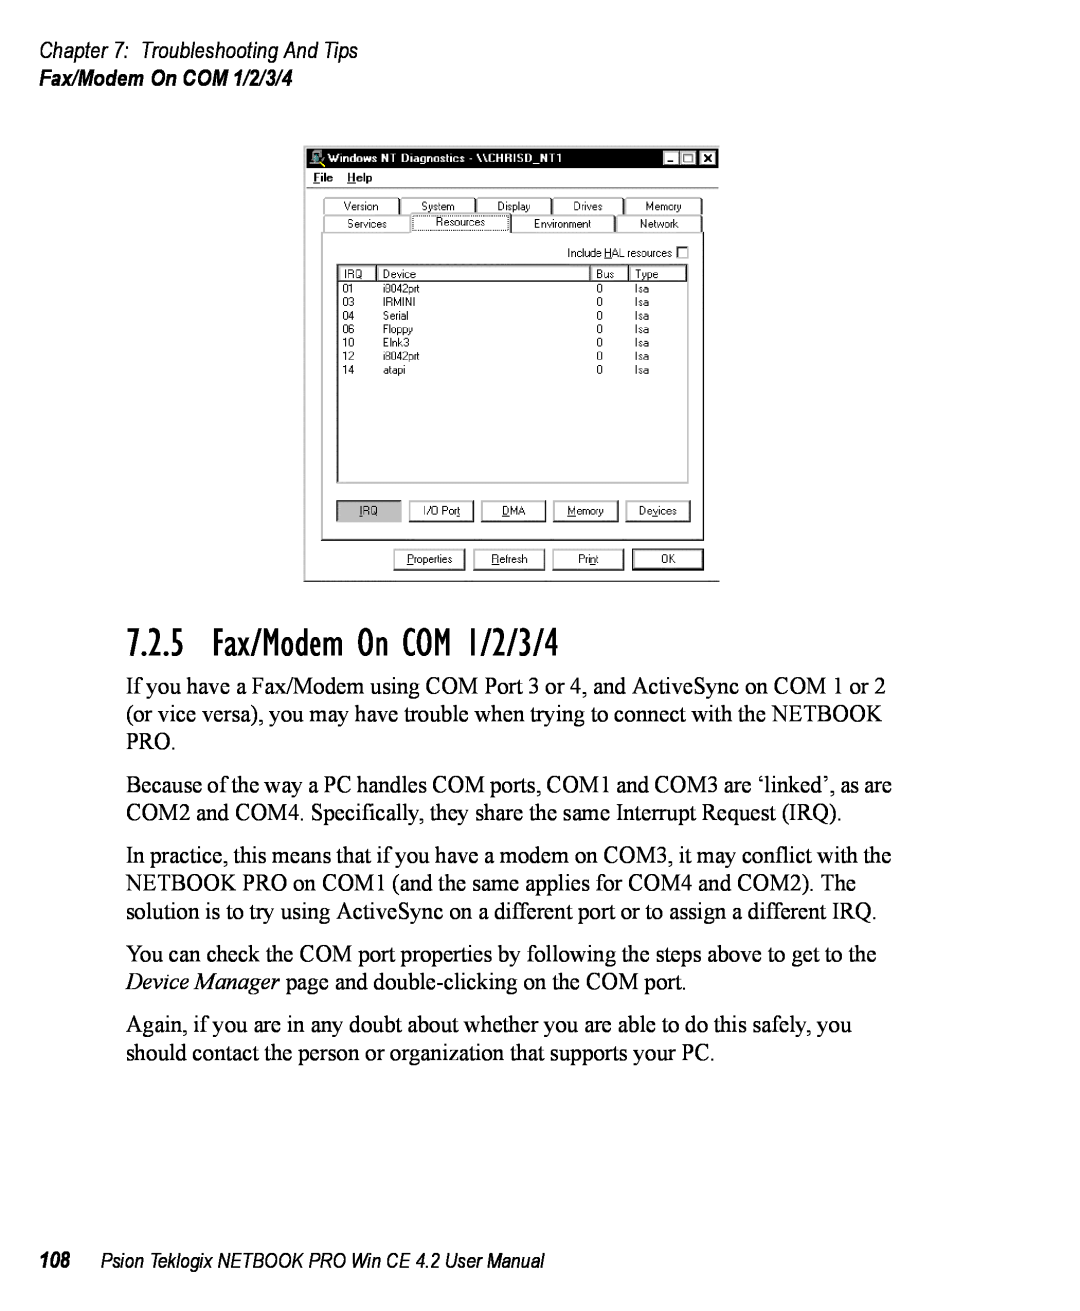 Psion Teklogix Win CE 4.2 user manual 7.2.5 Fax/Modem On COM 1/2/3/4, Troubleshooting And Tips 